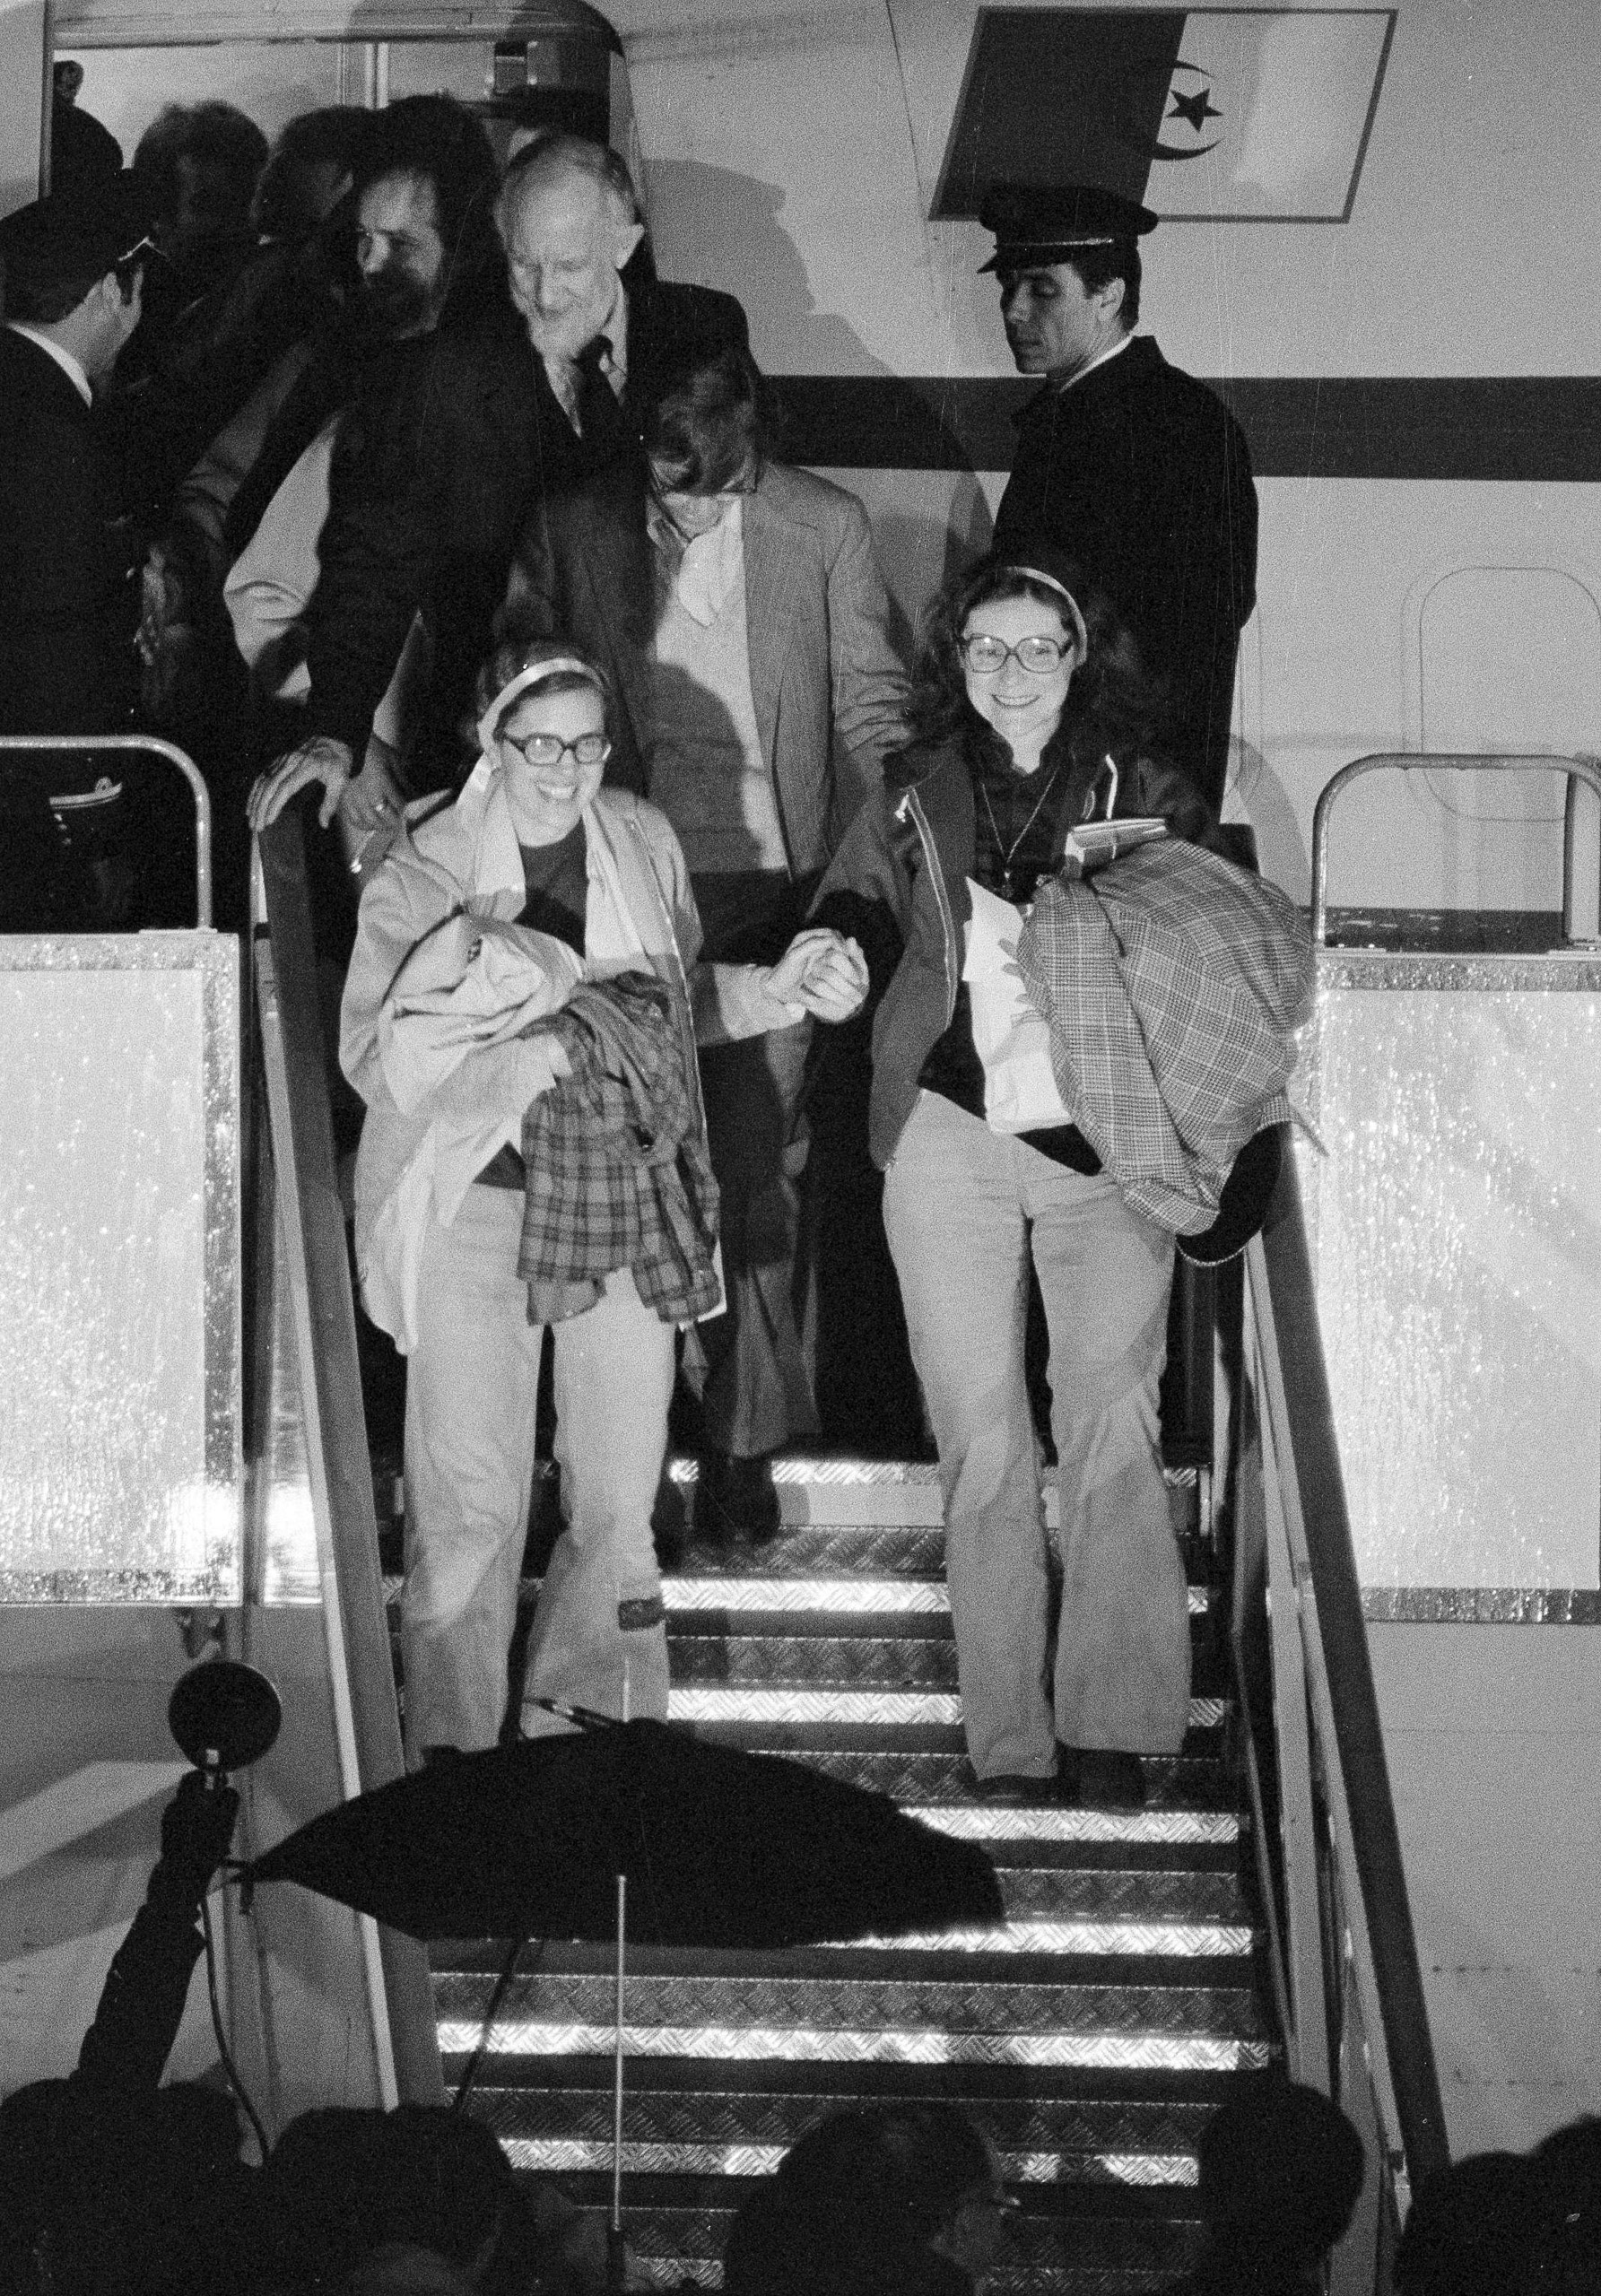 Kathryn Koob, right, and Elizabeth Ann Swift hold hands as they leave the Algerian aircraft which brought them to Algiers from Tehran at Algiers airport, Jan. 21, 1981. The women were two of the United States hostages held for 444 days in Iran.